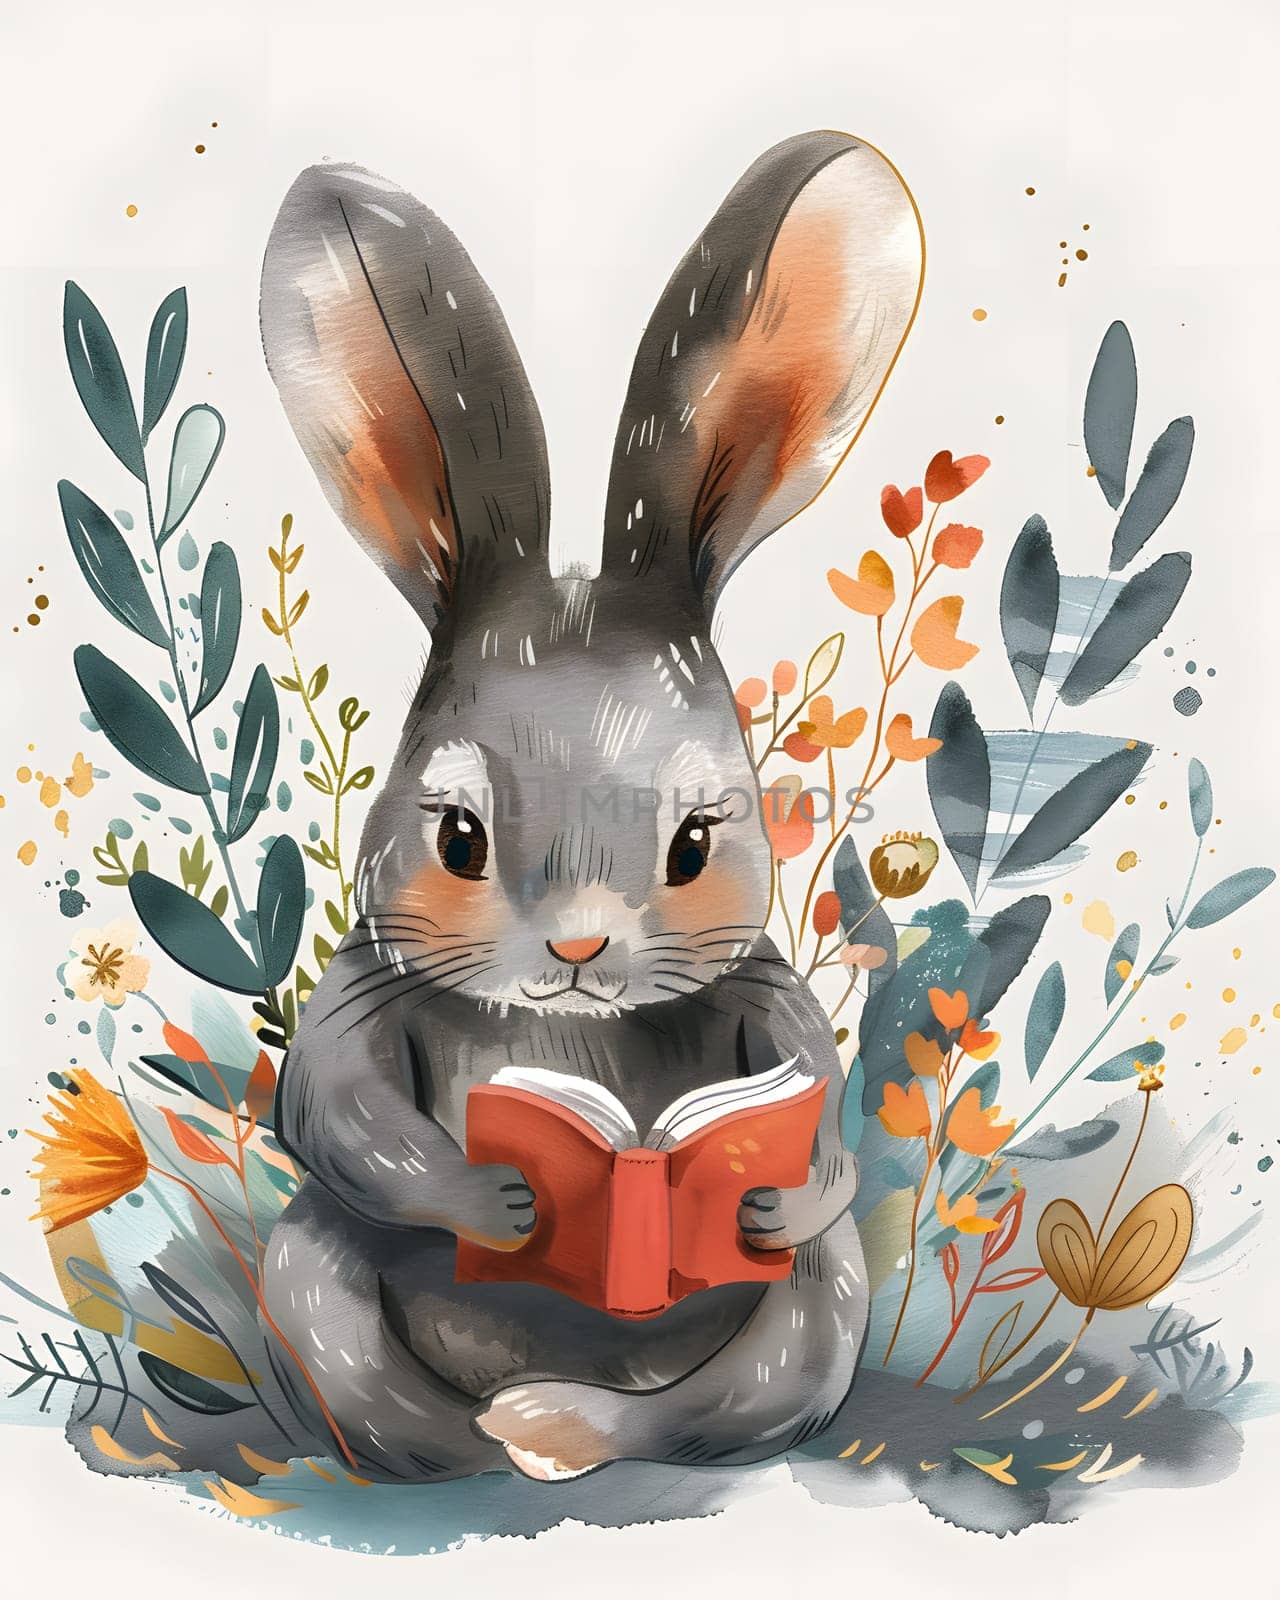 Organism Rabbit sitting in grass, engrossed in book by Nadtochiy